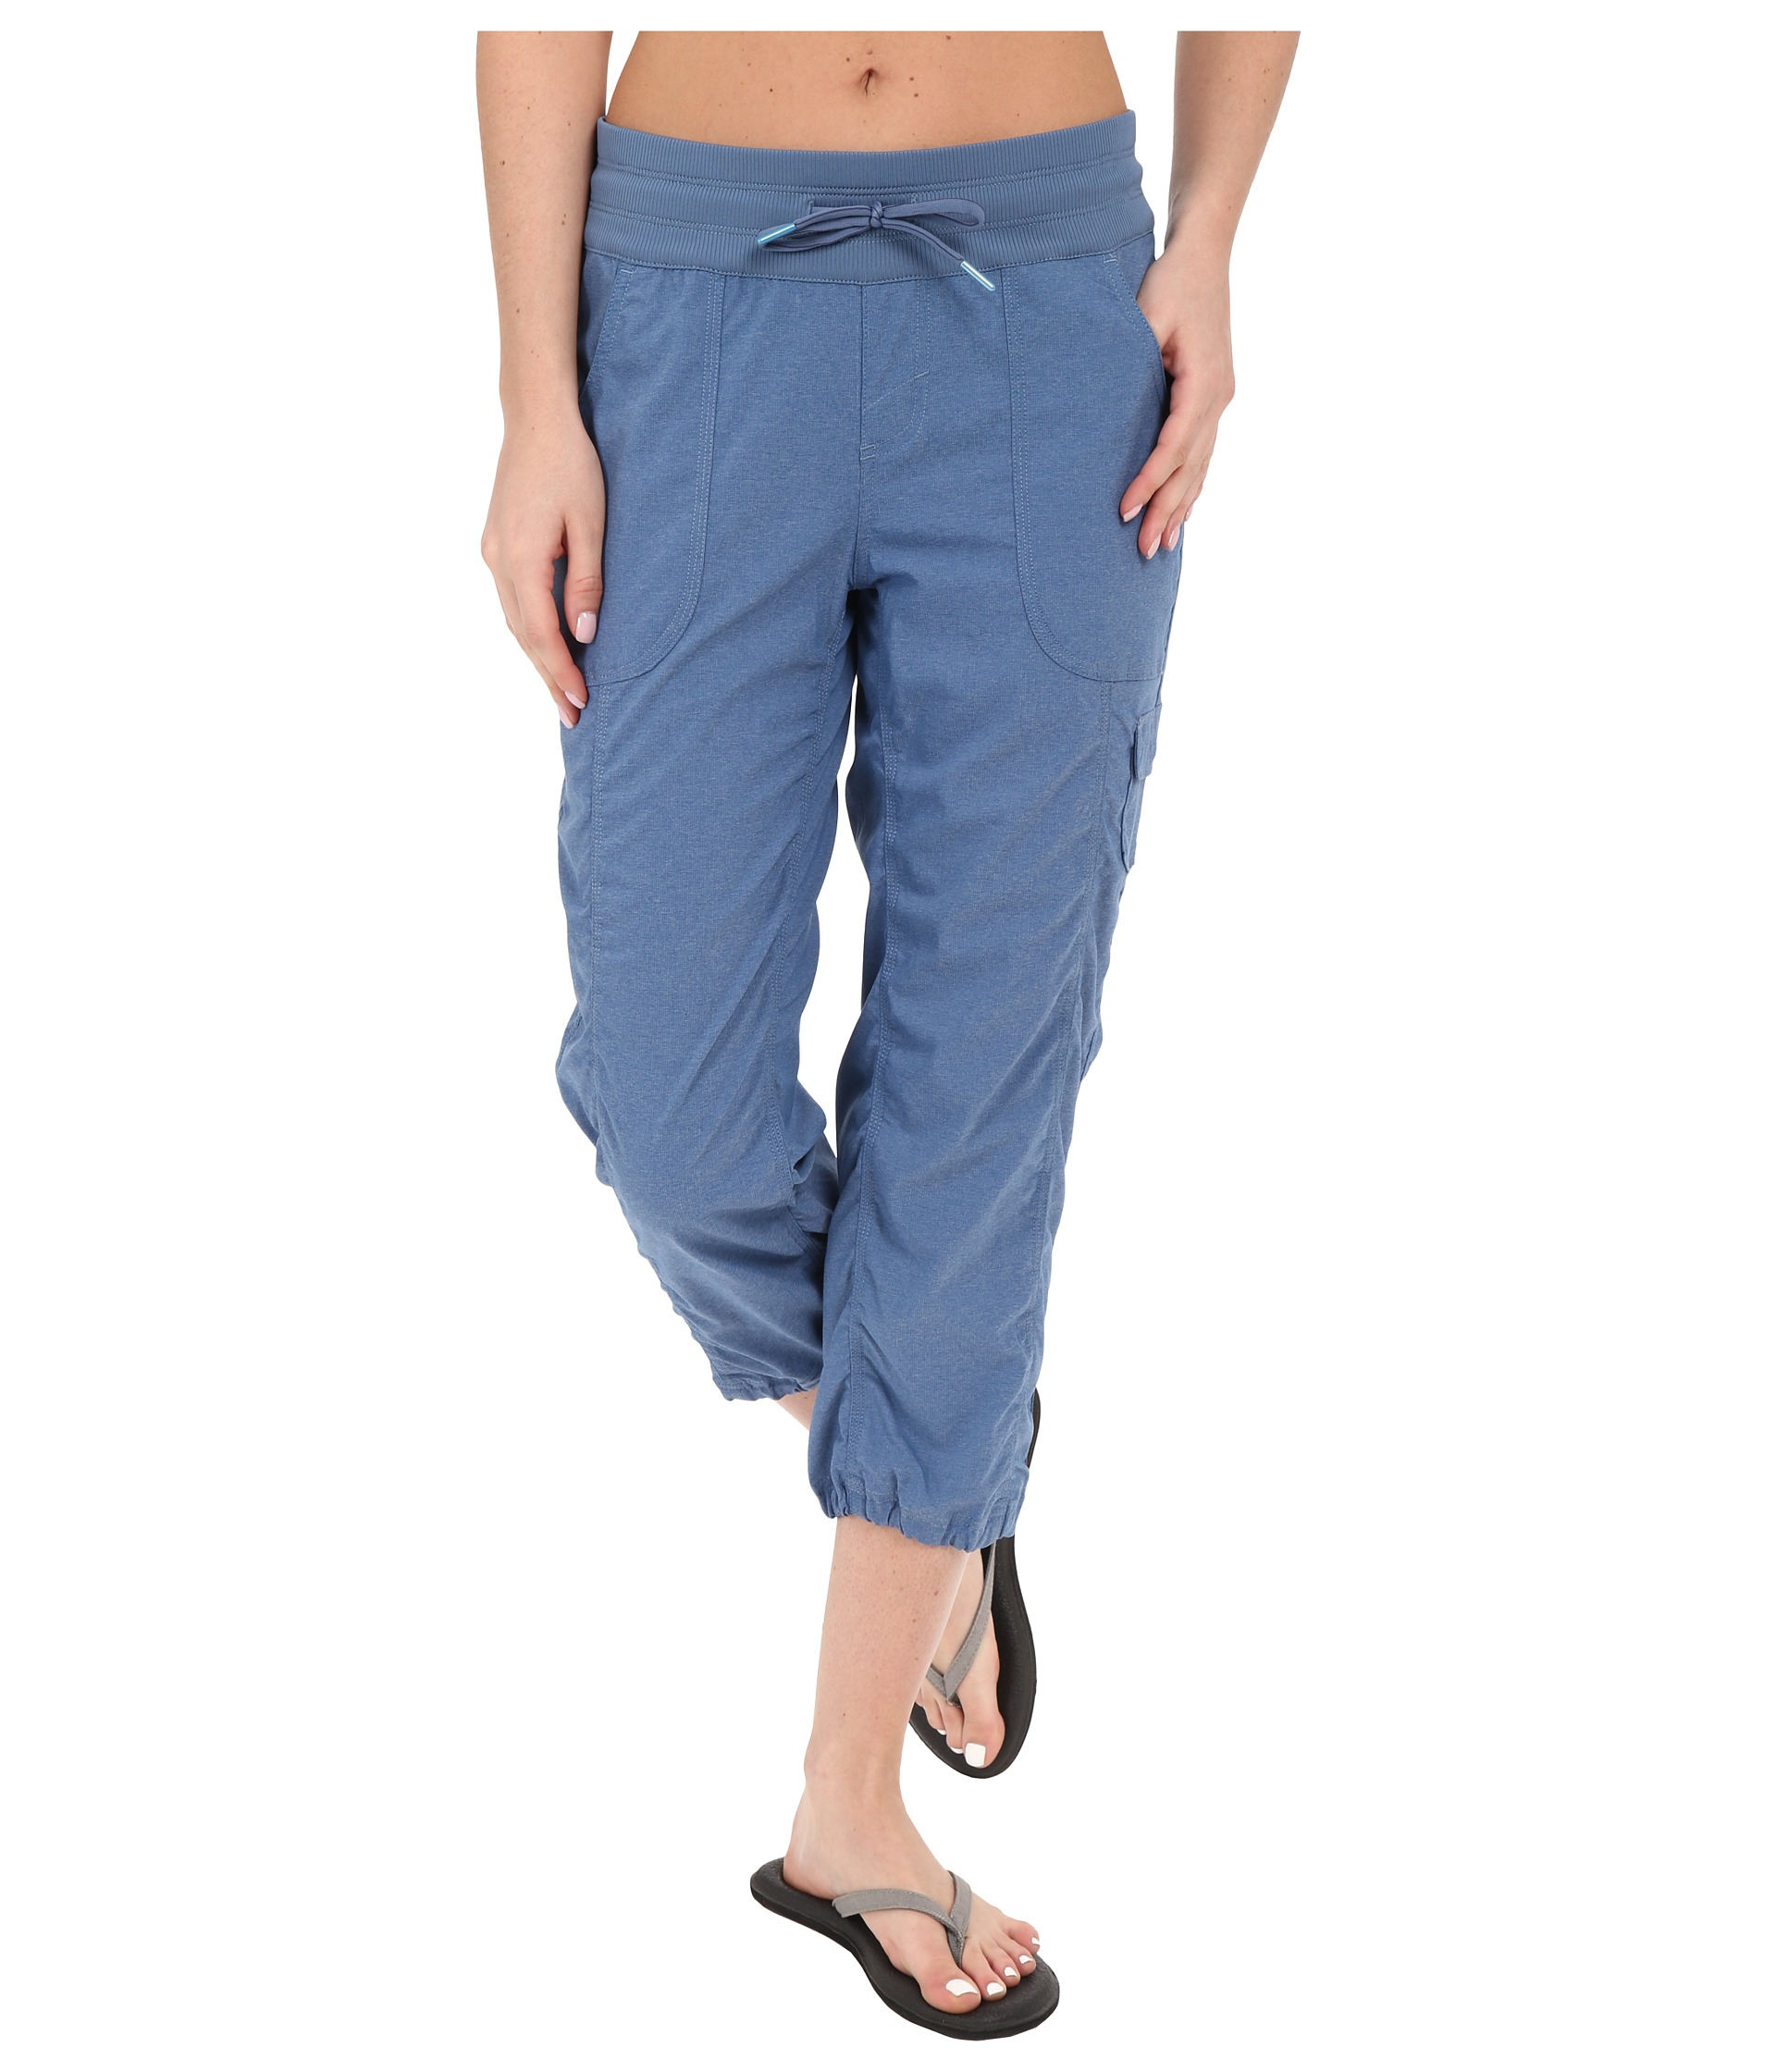 Lyst - The North Face Aphrodite Capris in Blue